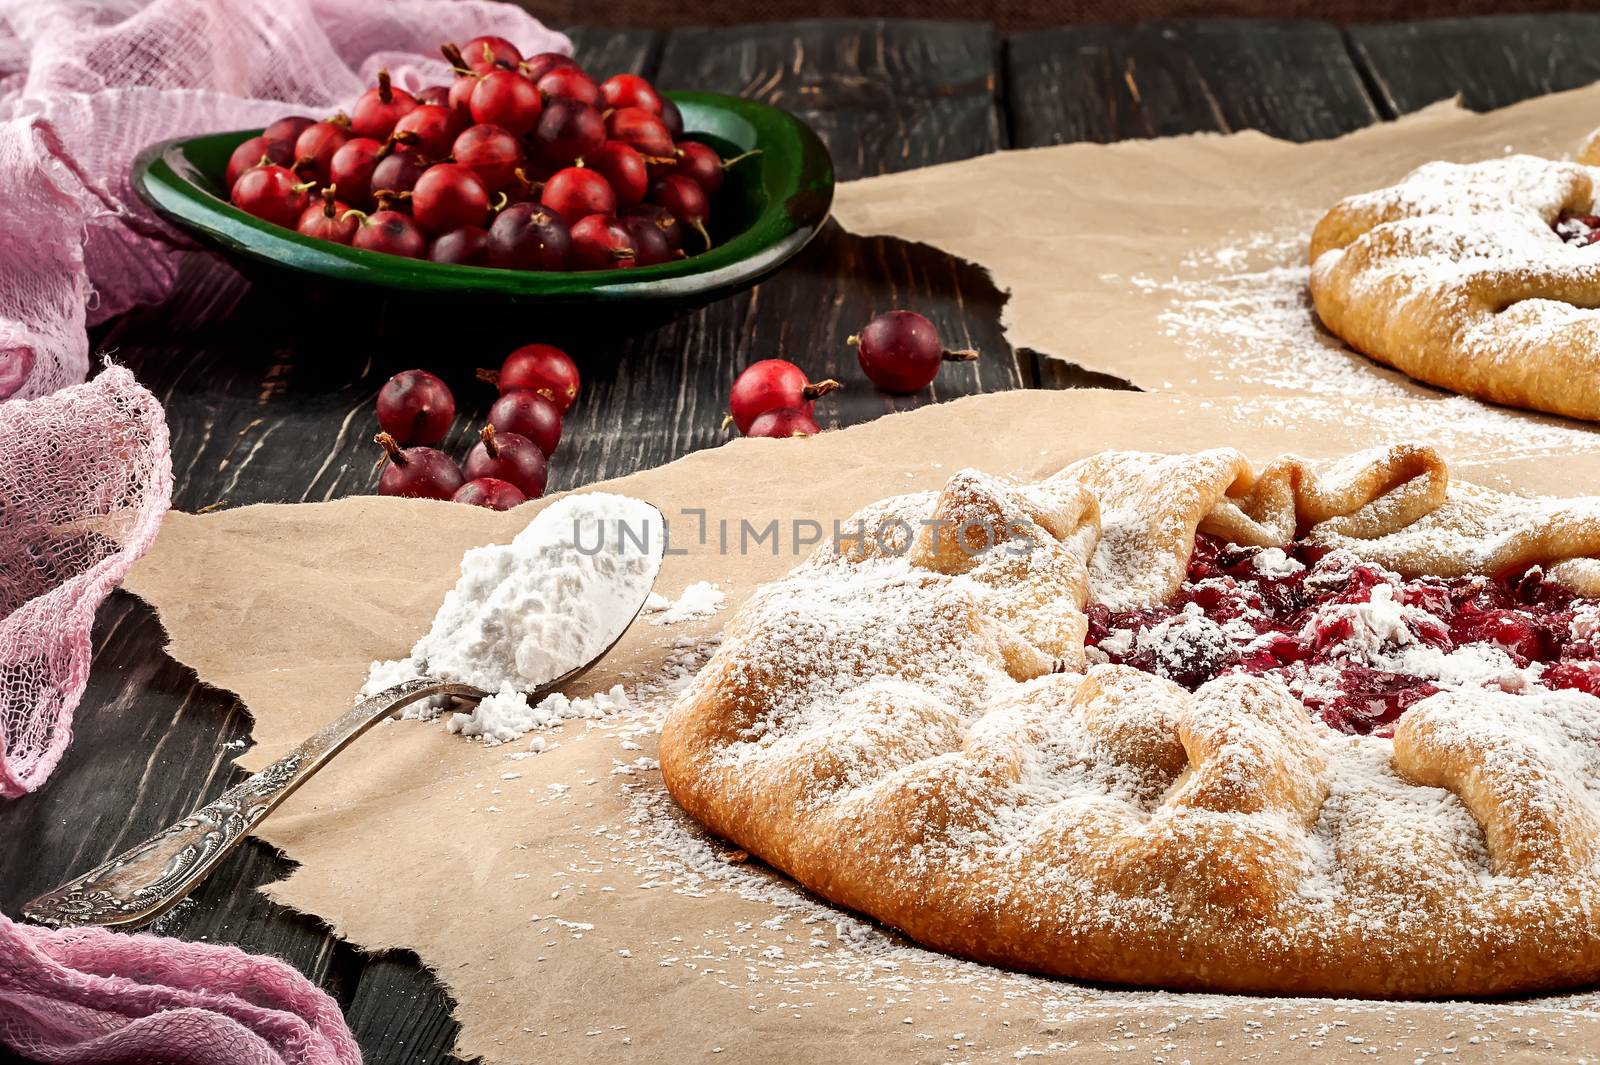 Open pies with gooseberries on a wooden table. Spoon with powdered sugar nearby. Gooseberry on a green plate in the background.